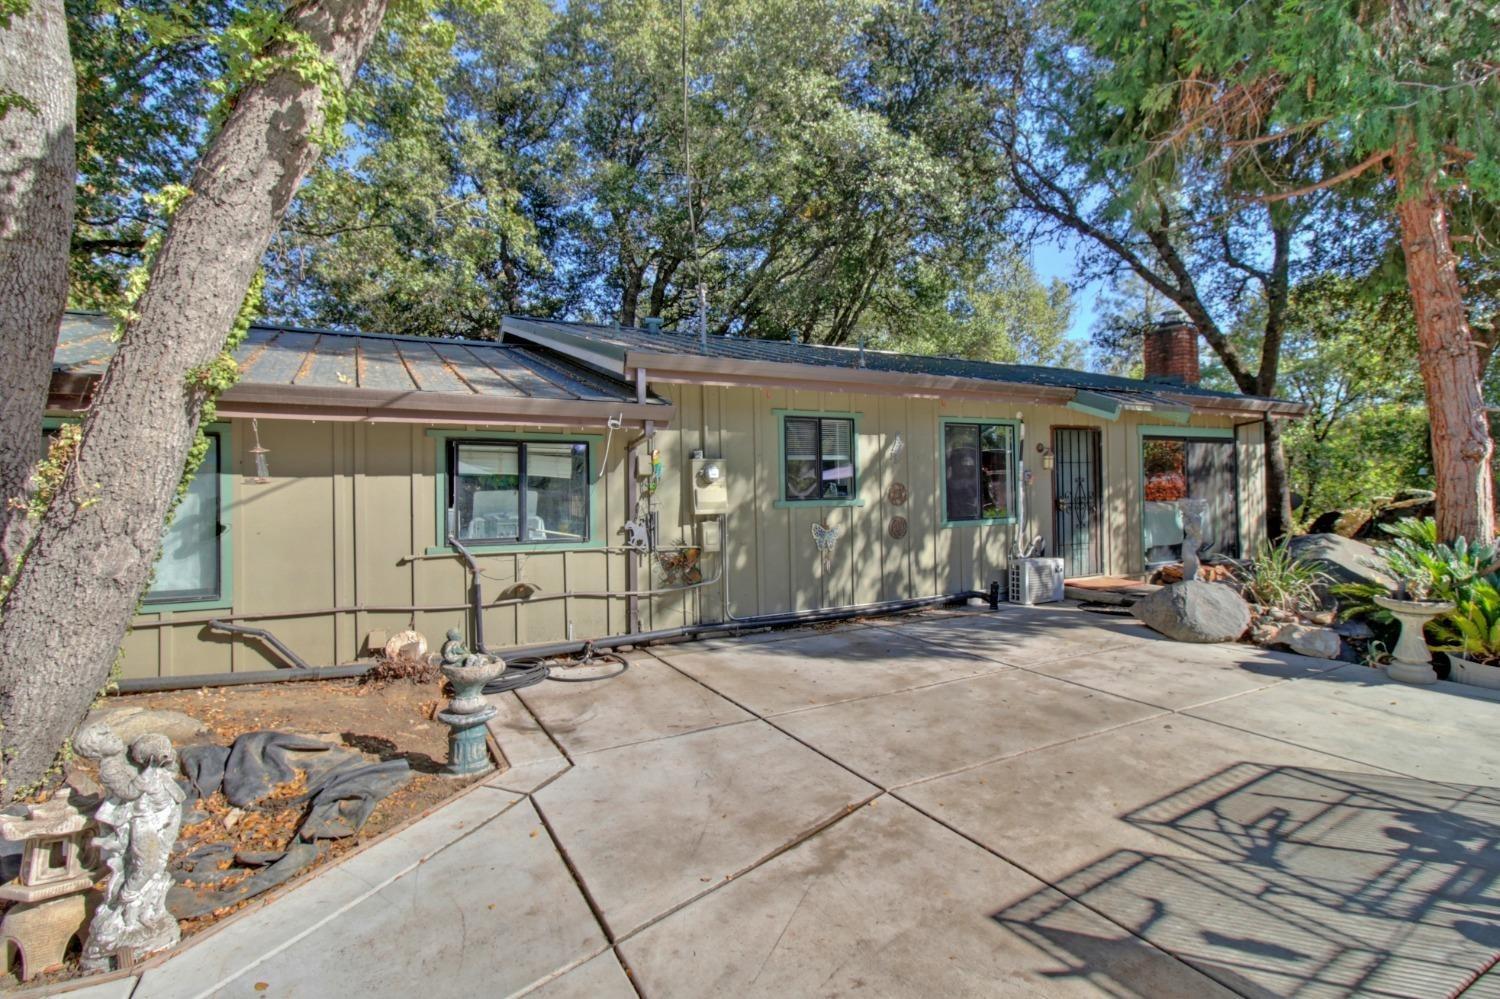 Photo of 3477 Squire Ln in Placerville, CA